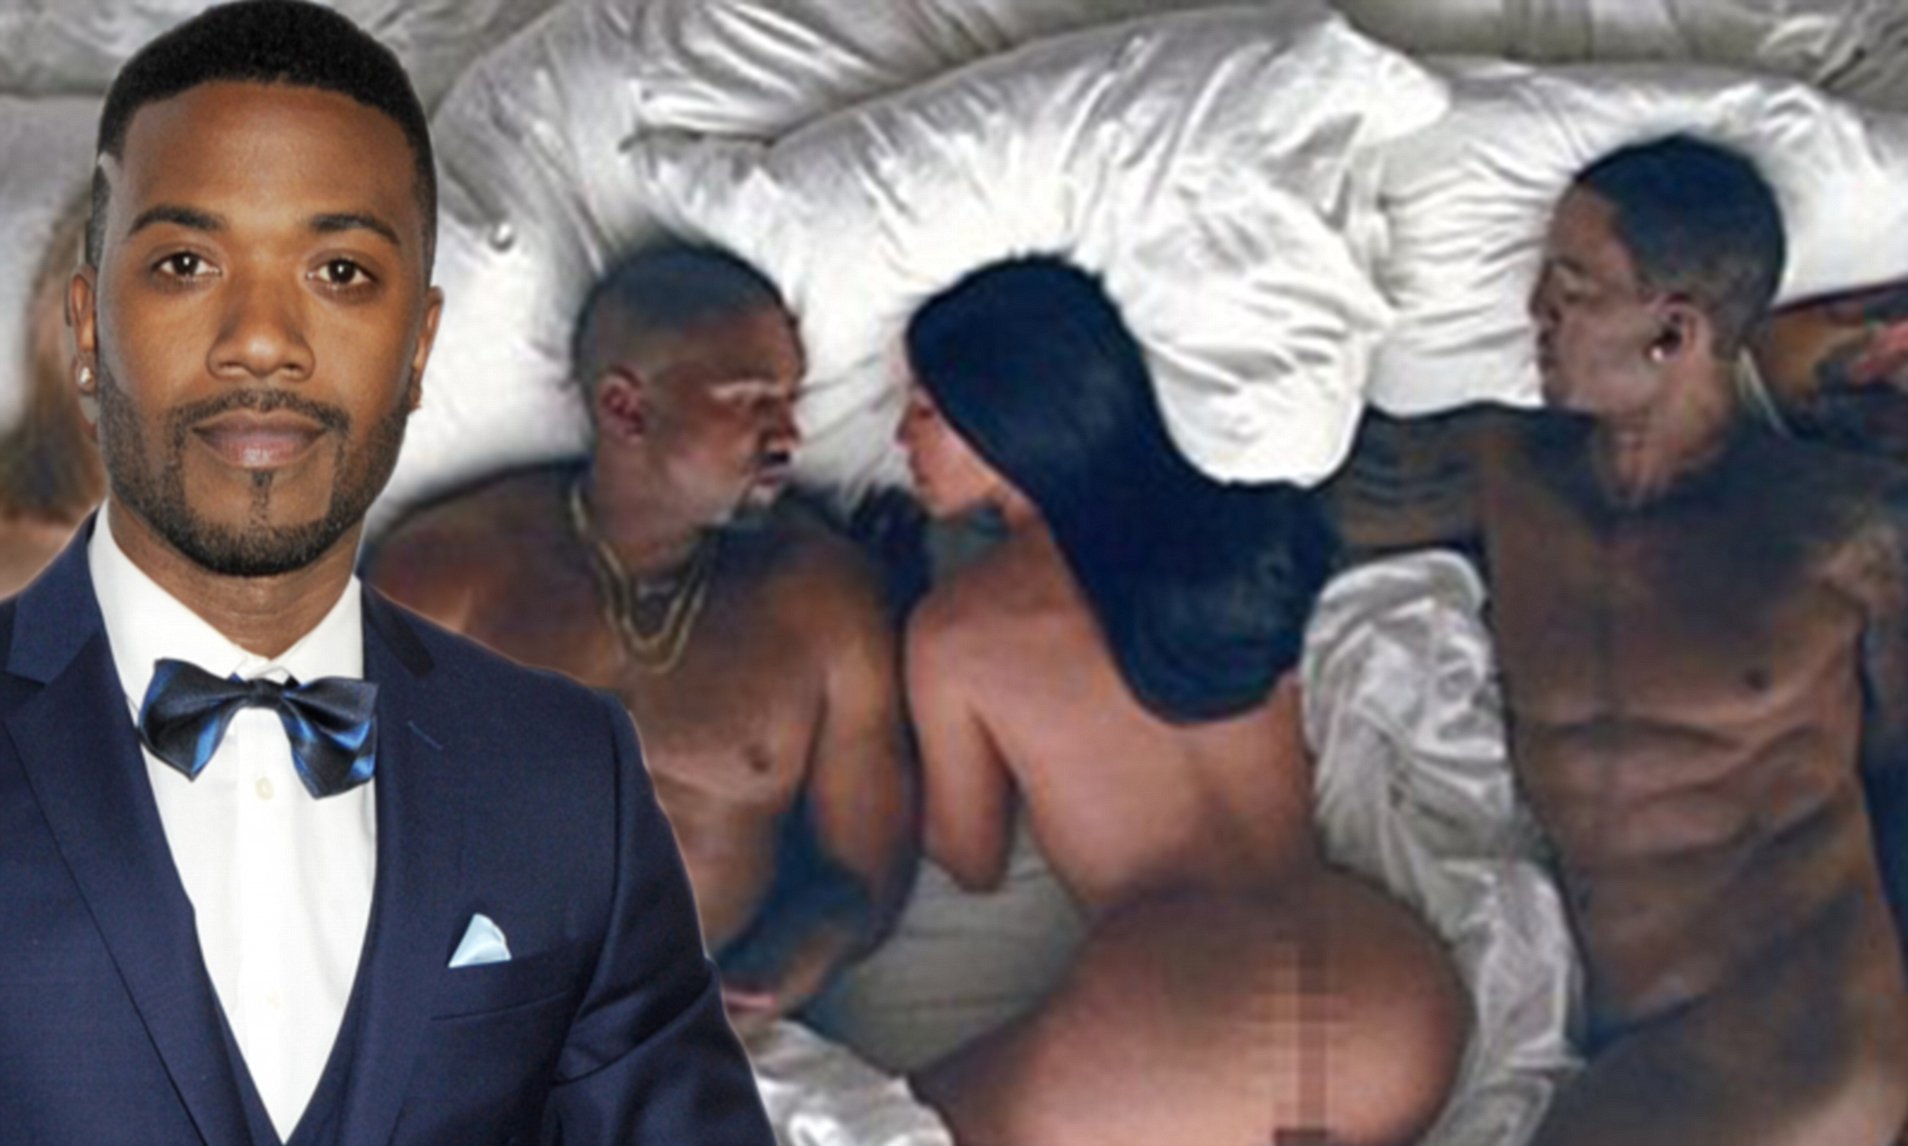 Best of Kim and ray j video